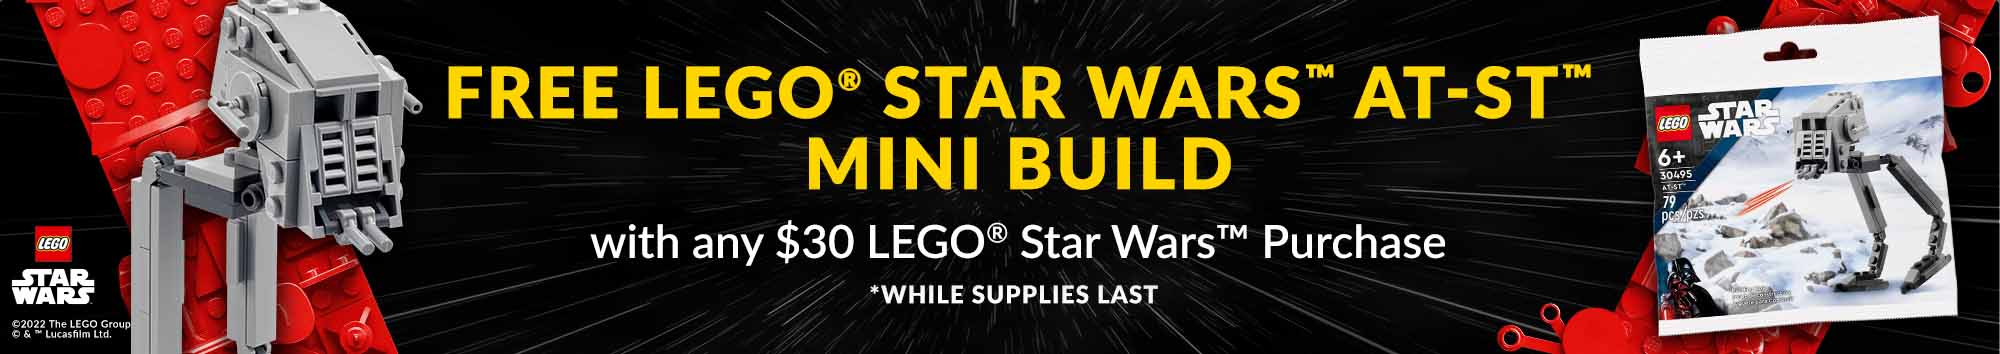 Free Lego Star Wars AT-ST Mini Build with any #30 LEGO Star Wars Purchase. While supplies last.